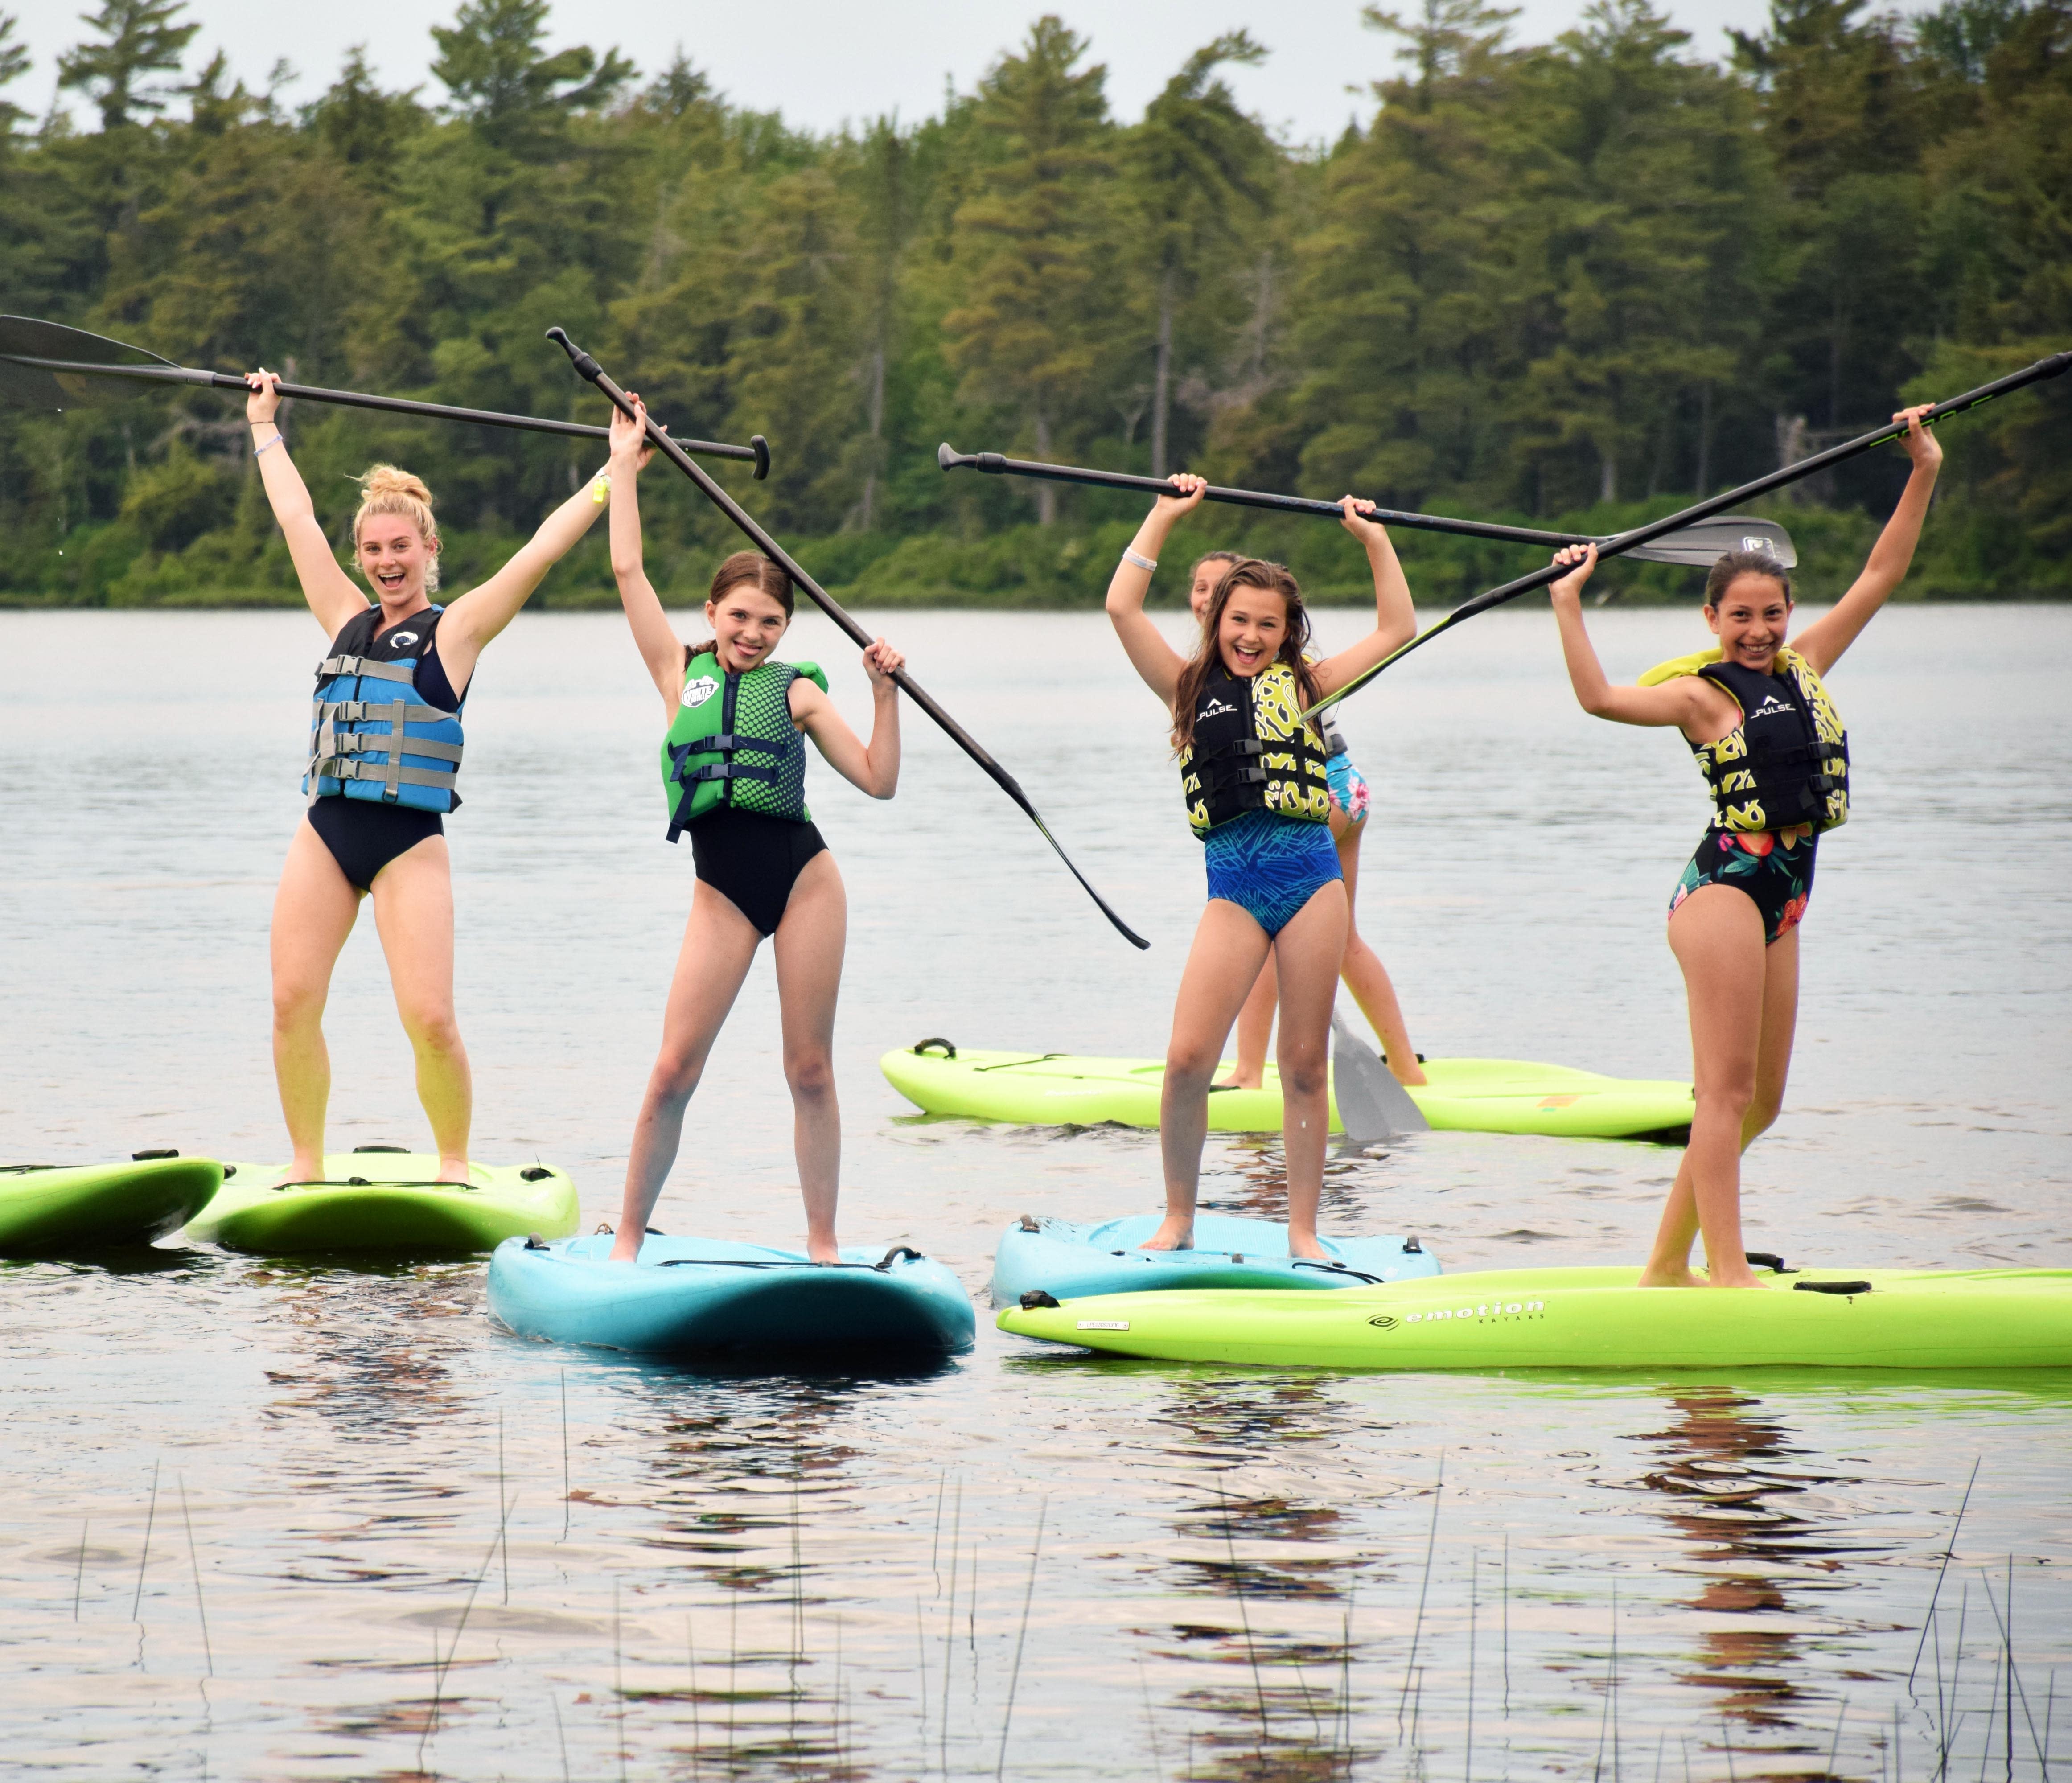 Board Sailing & Paddle Boarding, Hockey Opportunity Summer Camp